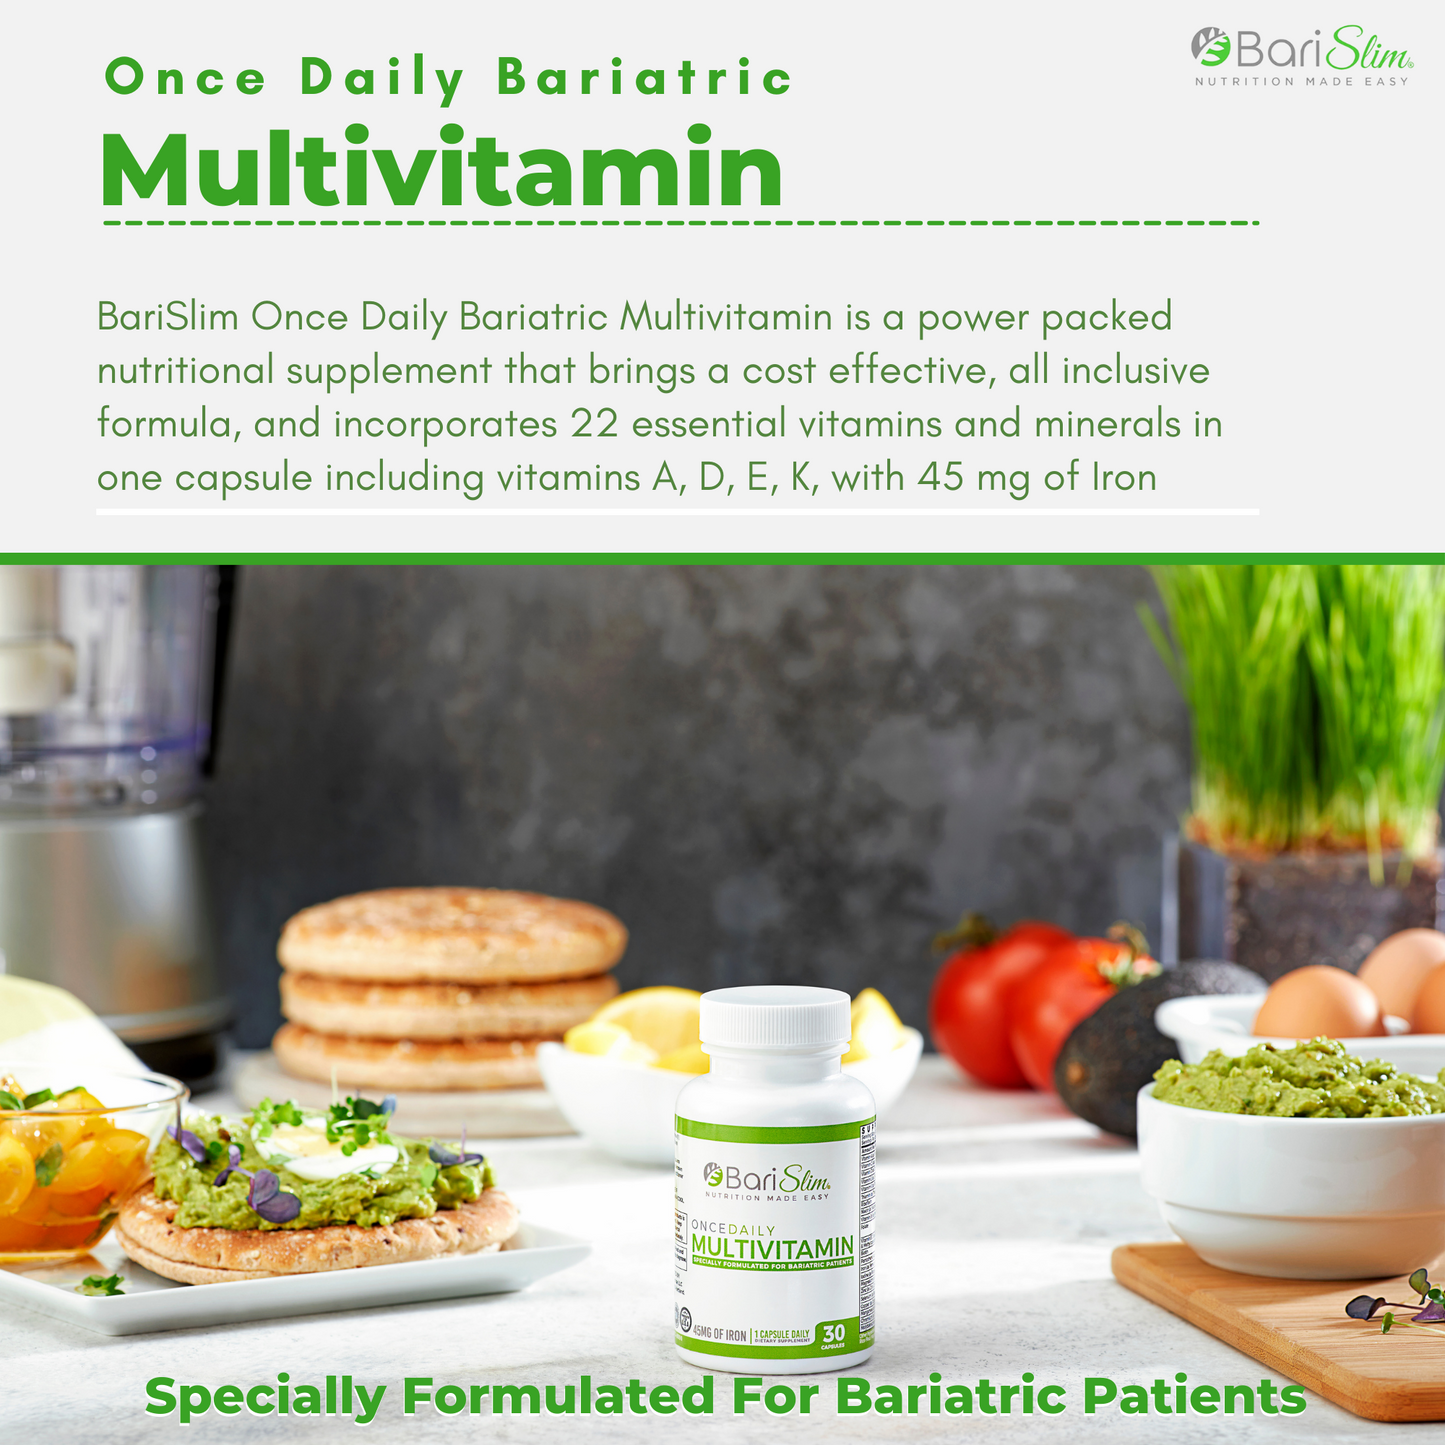 Once daily bariatric Multivitamin with iron for bariatric patients